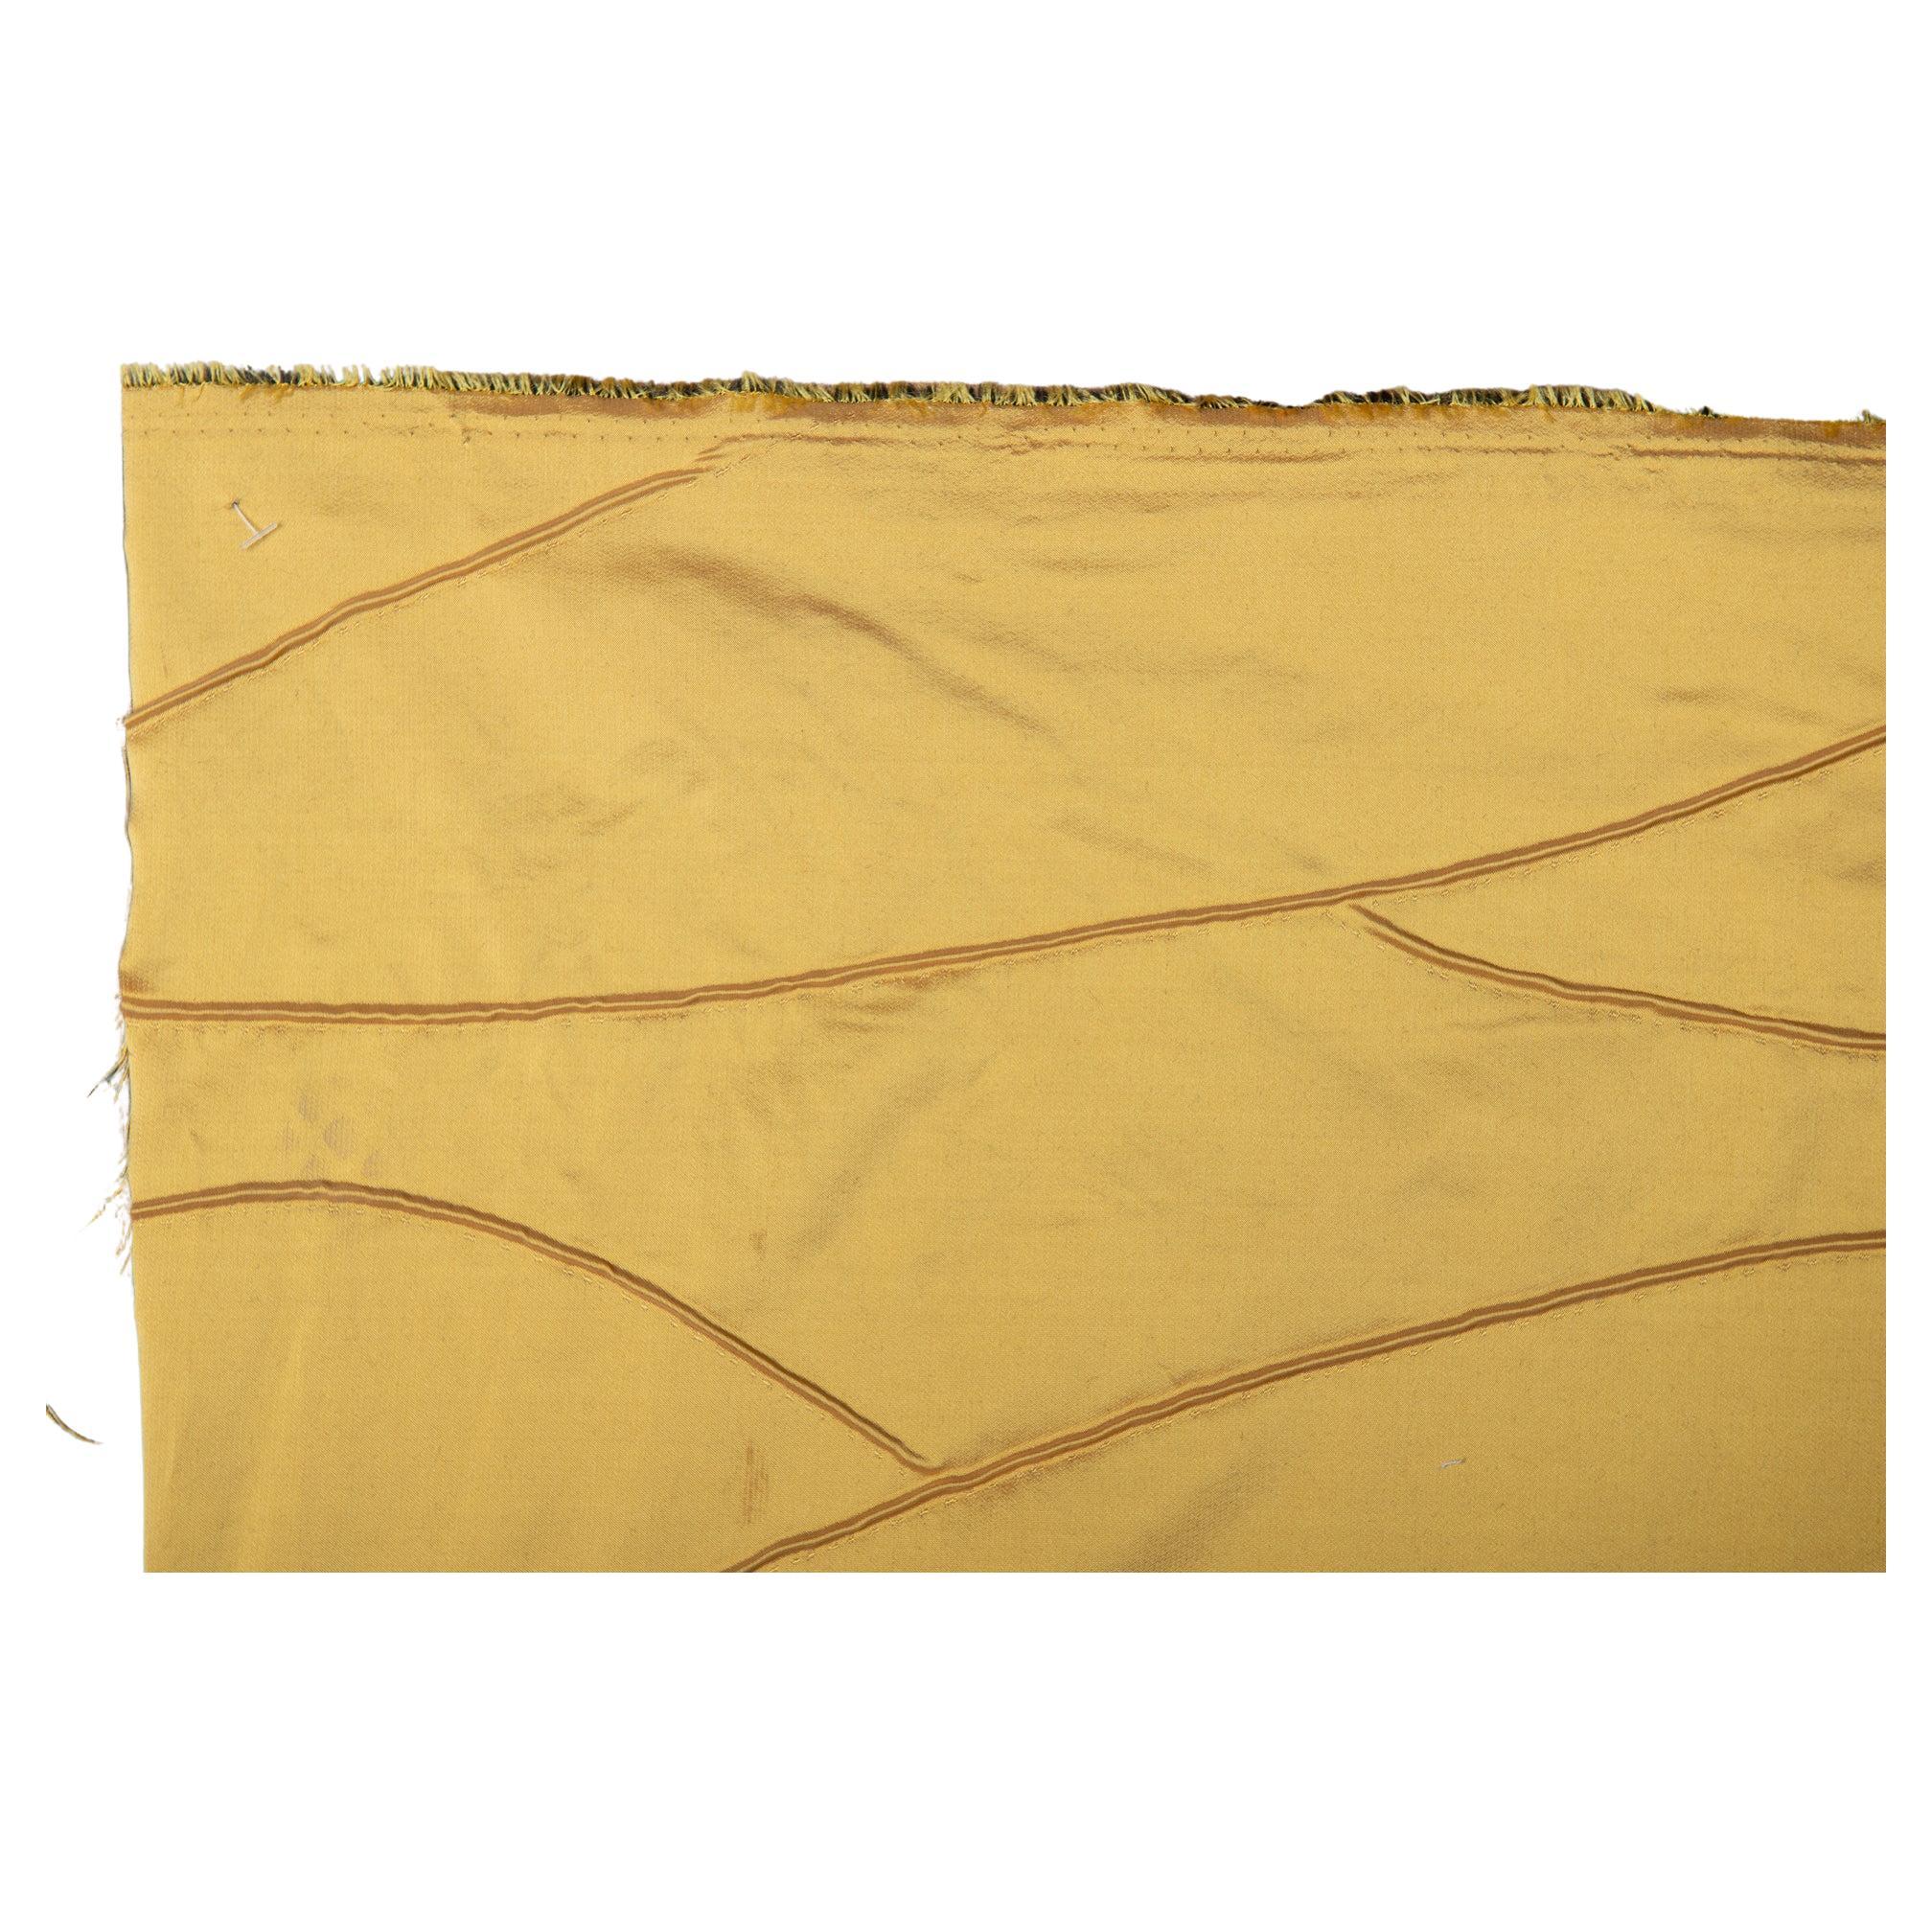 Golden Yellow Silk Remnant Textile Fabric Mulberry